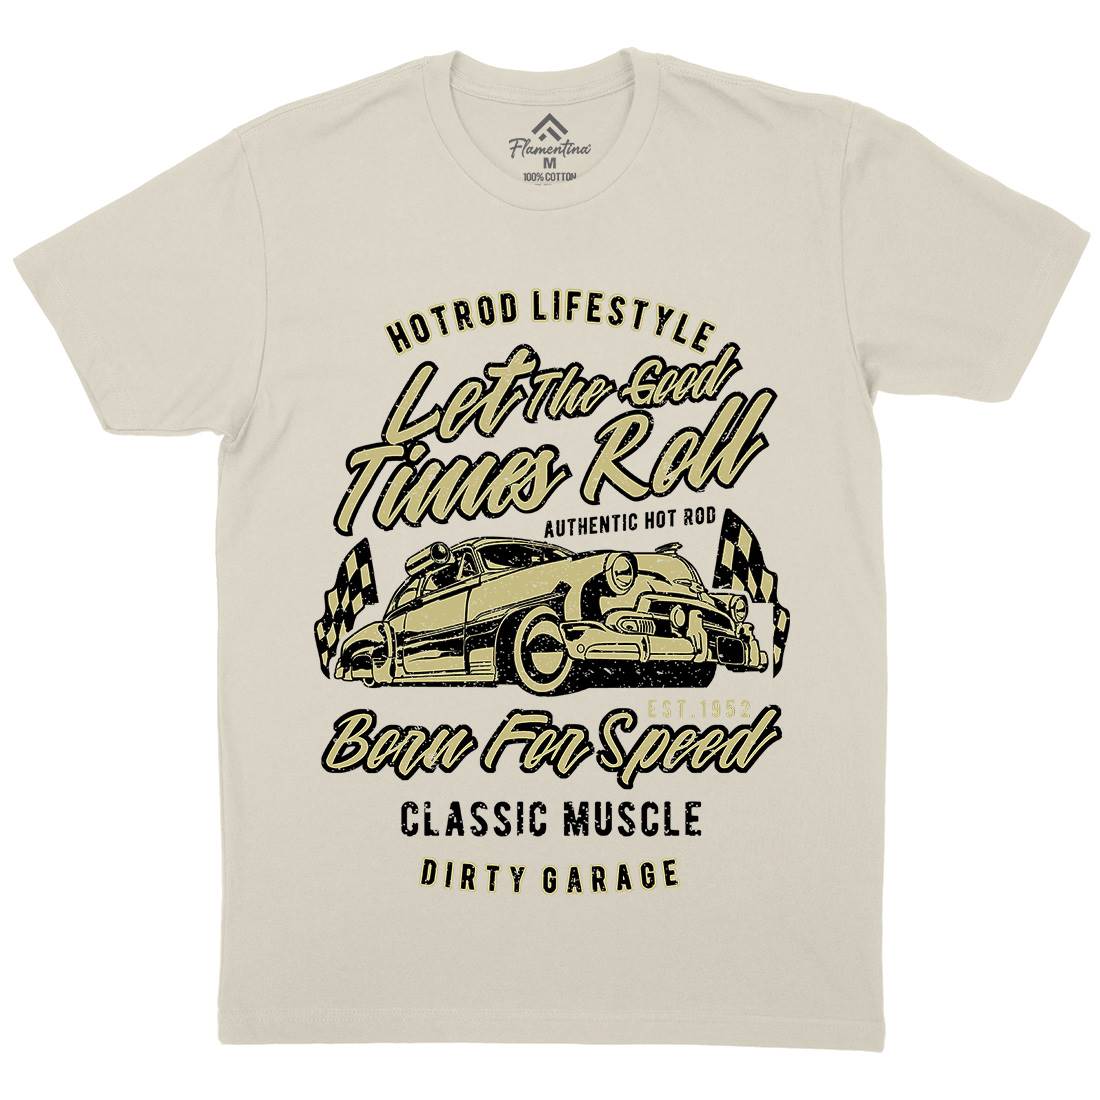 Let The Good Times Roll Mens Organic Crew Neck T-Shirt Cars A705